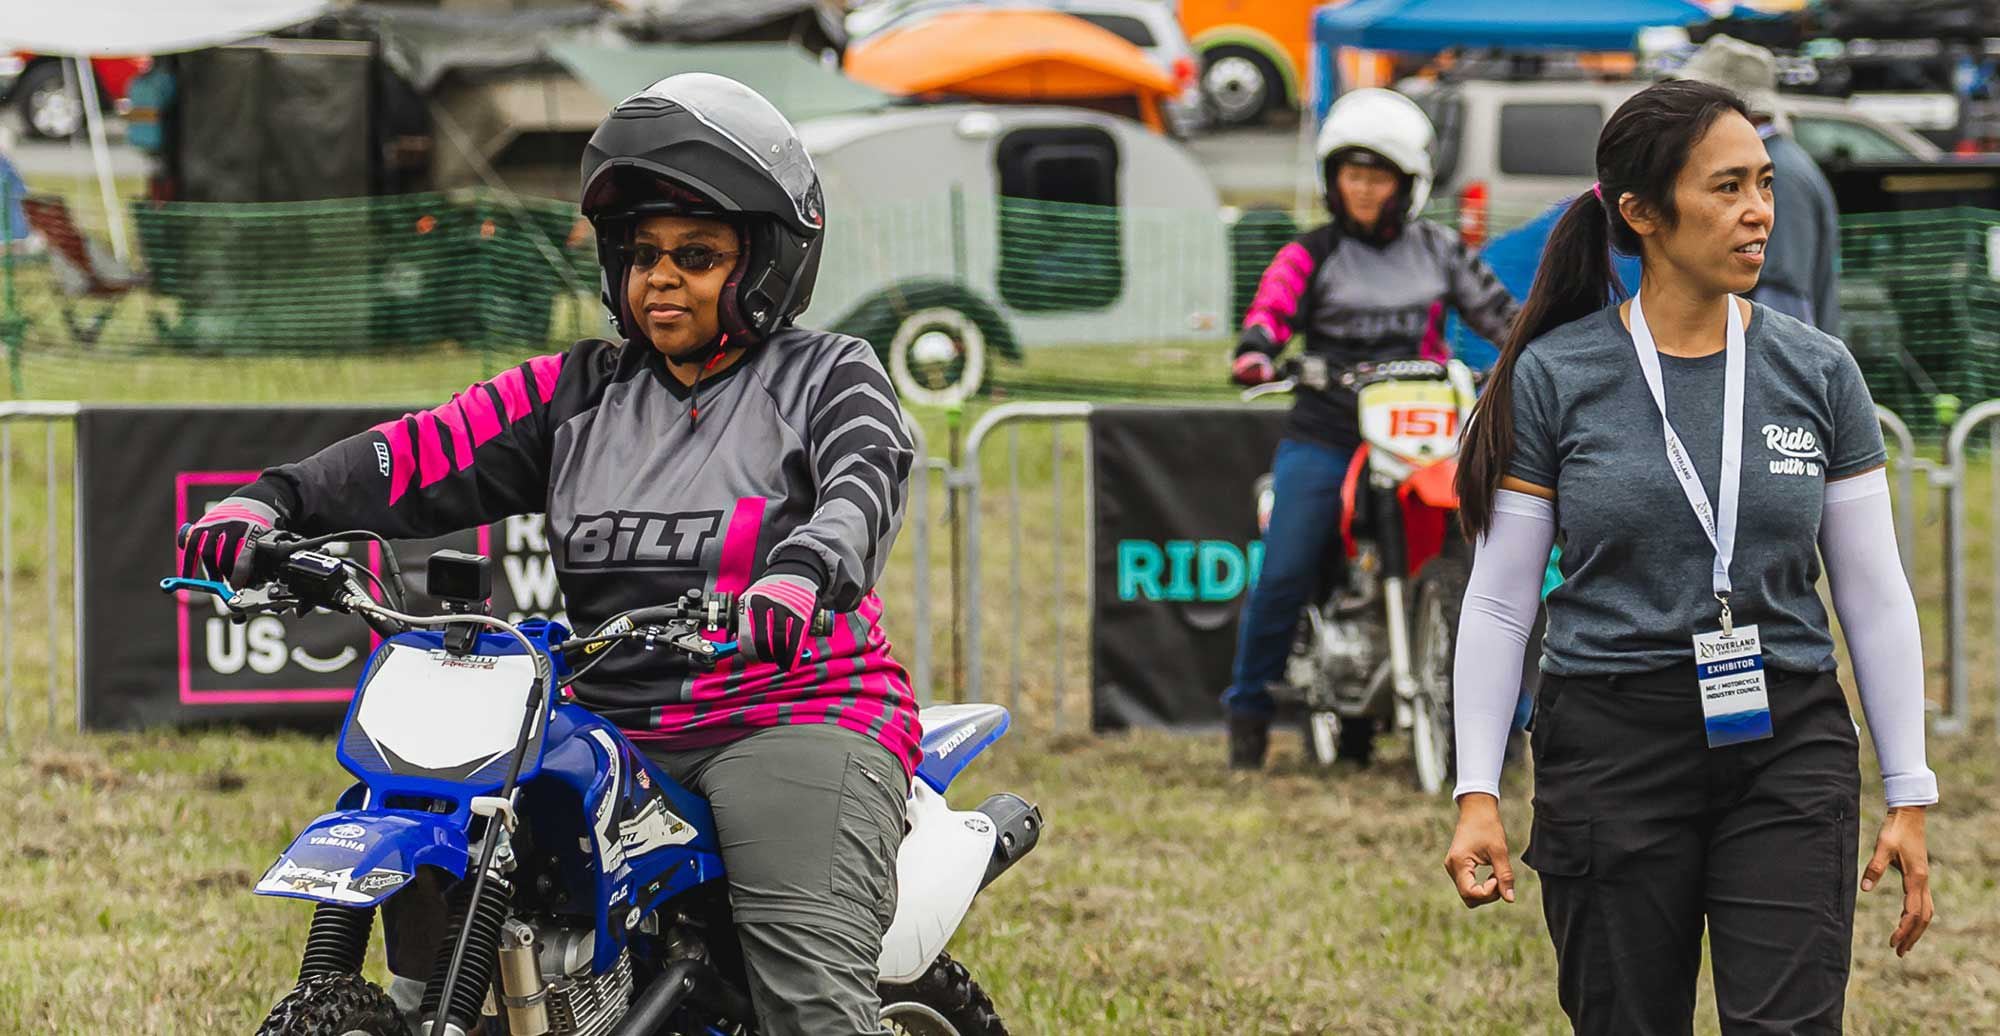 For Overland Expo participants looking to take their first motorcycle ride, the Ride With Us Moto Intros initiative will be available at all four expos in 2022.